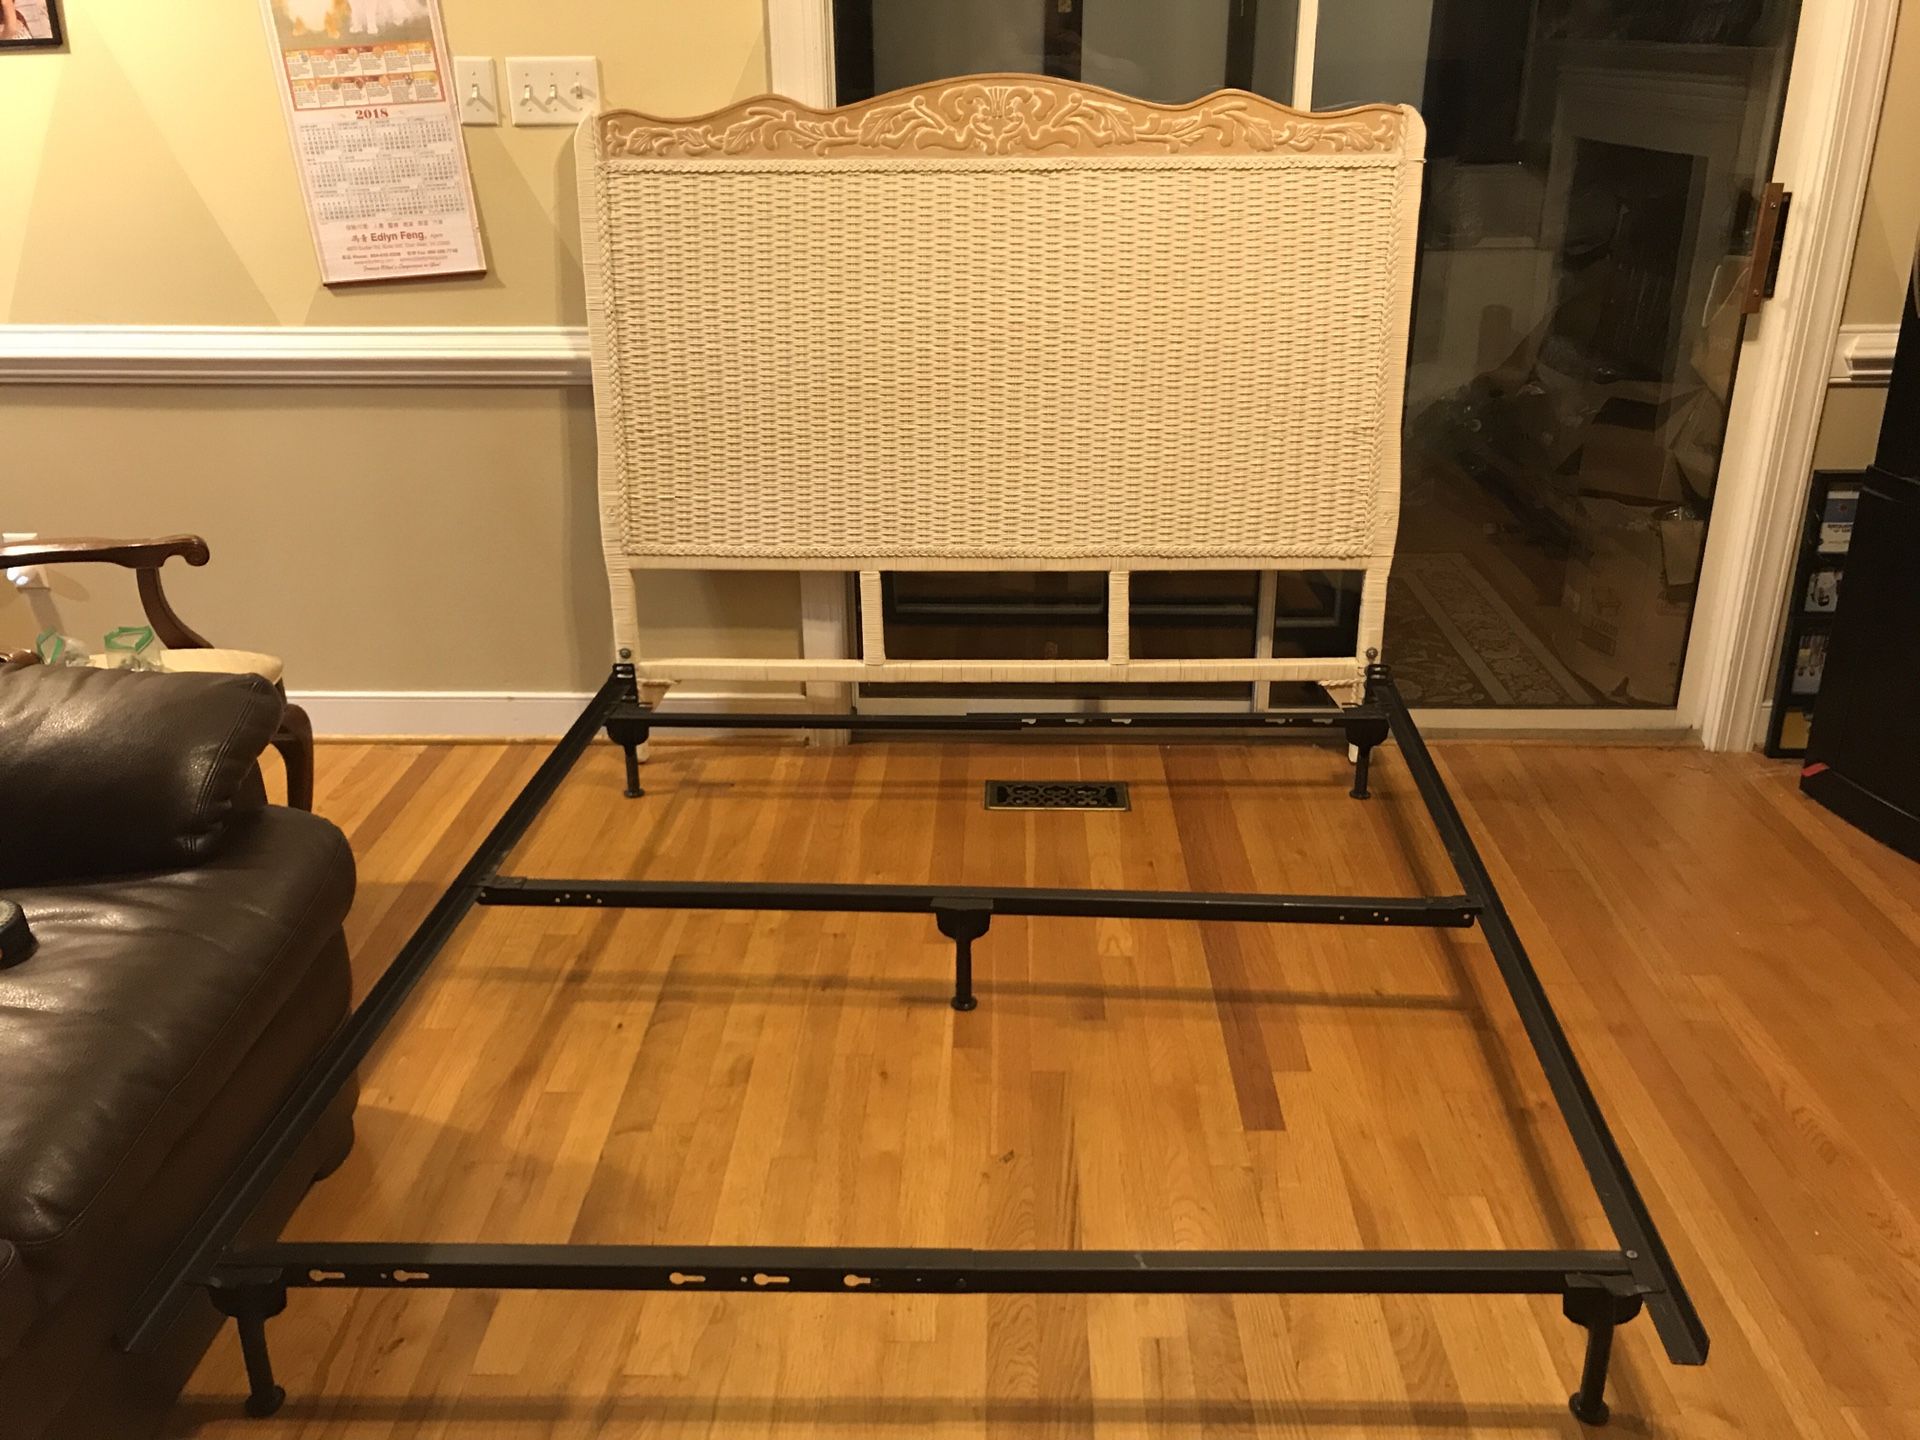 Wicker queen size headboard and metal bed frame